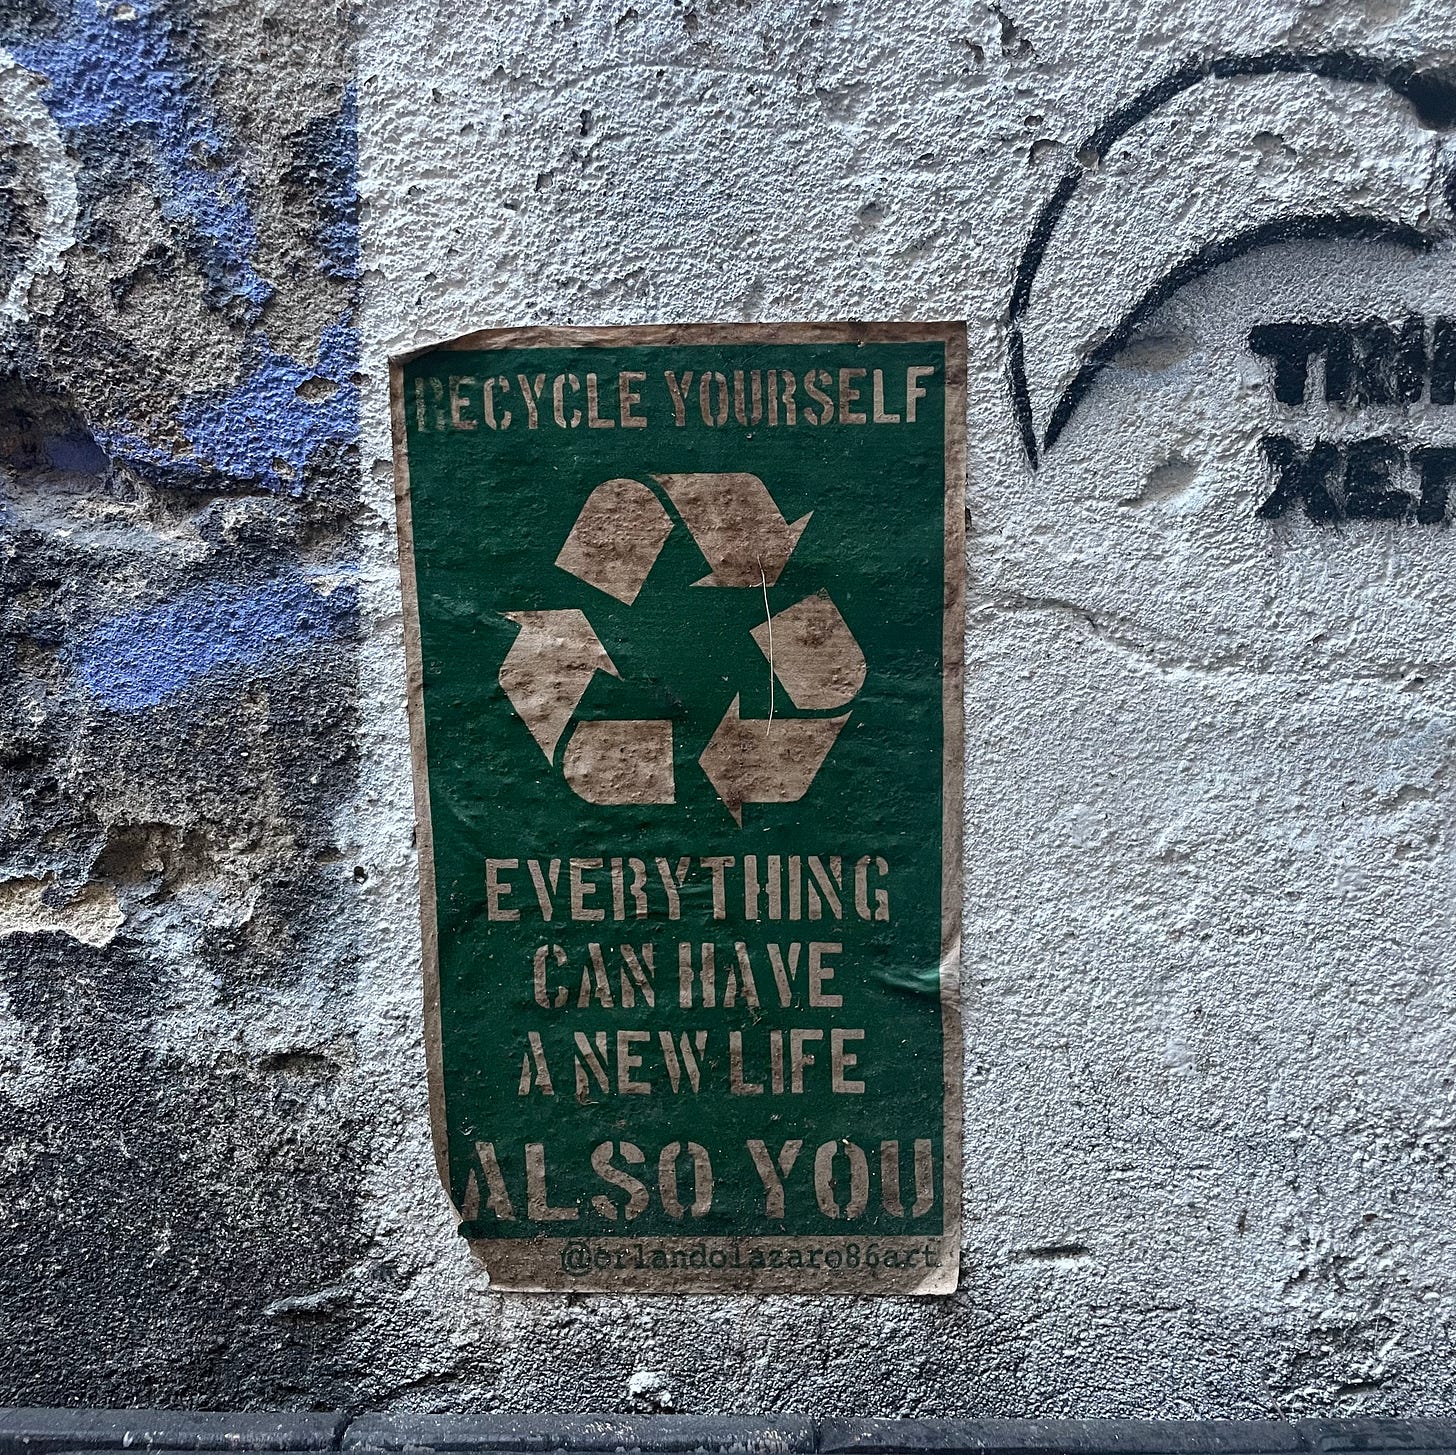 Poster that says "Recycle yourself. Everything can have a new life."